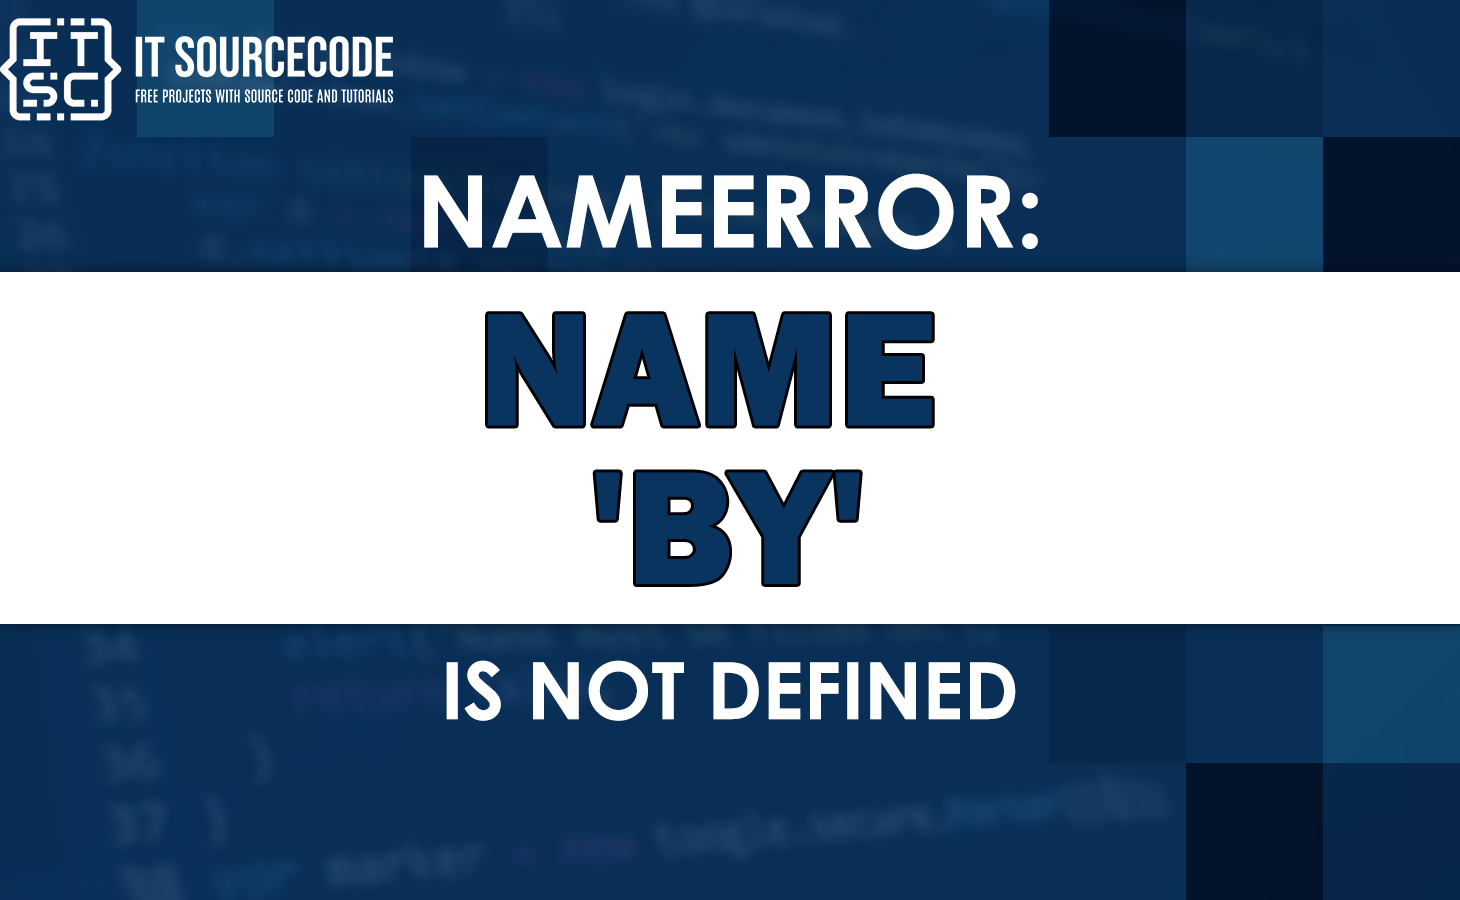 Nameerror: name by is not defined